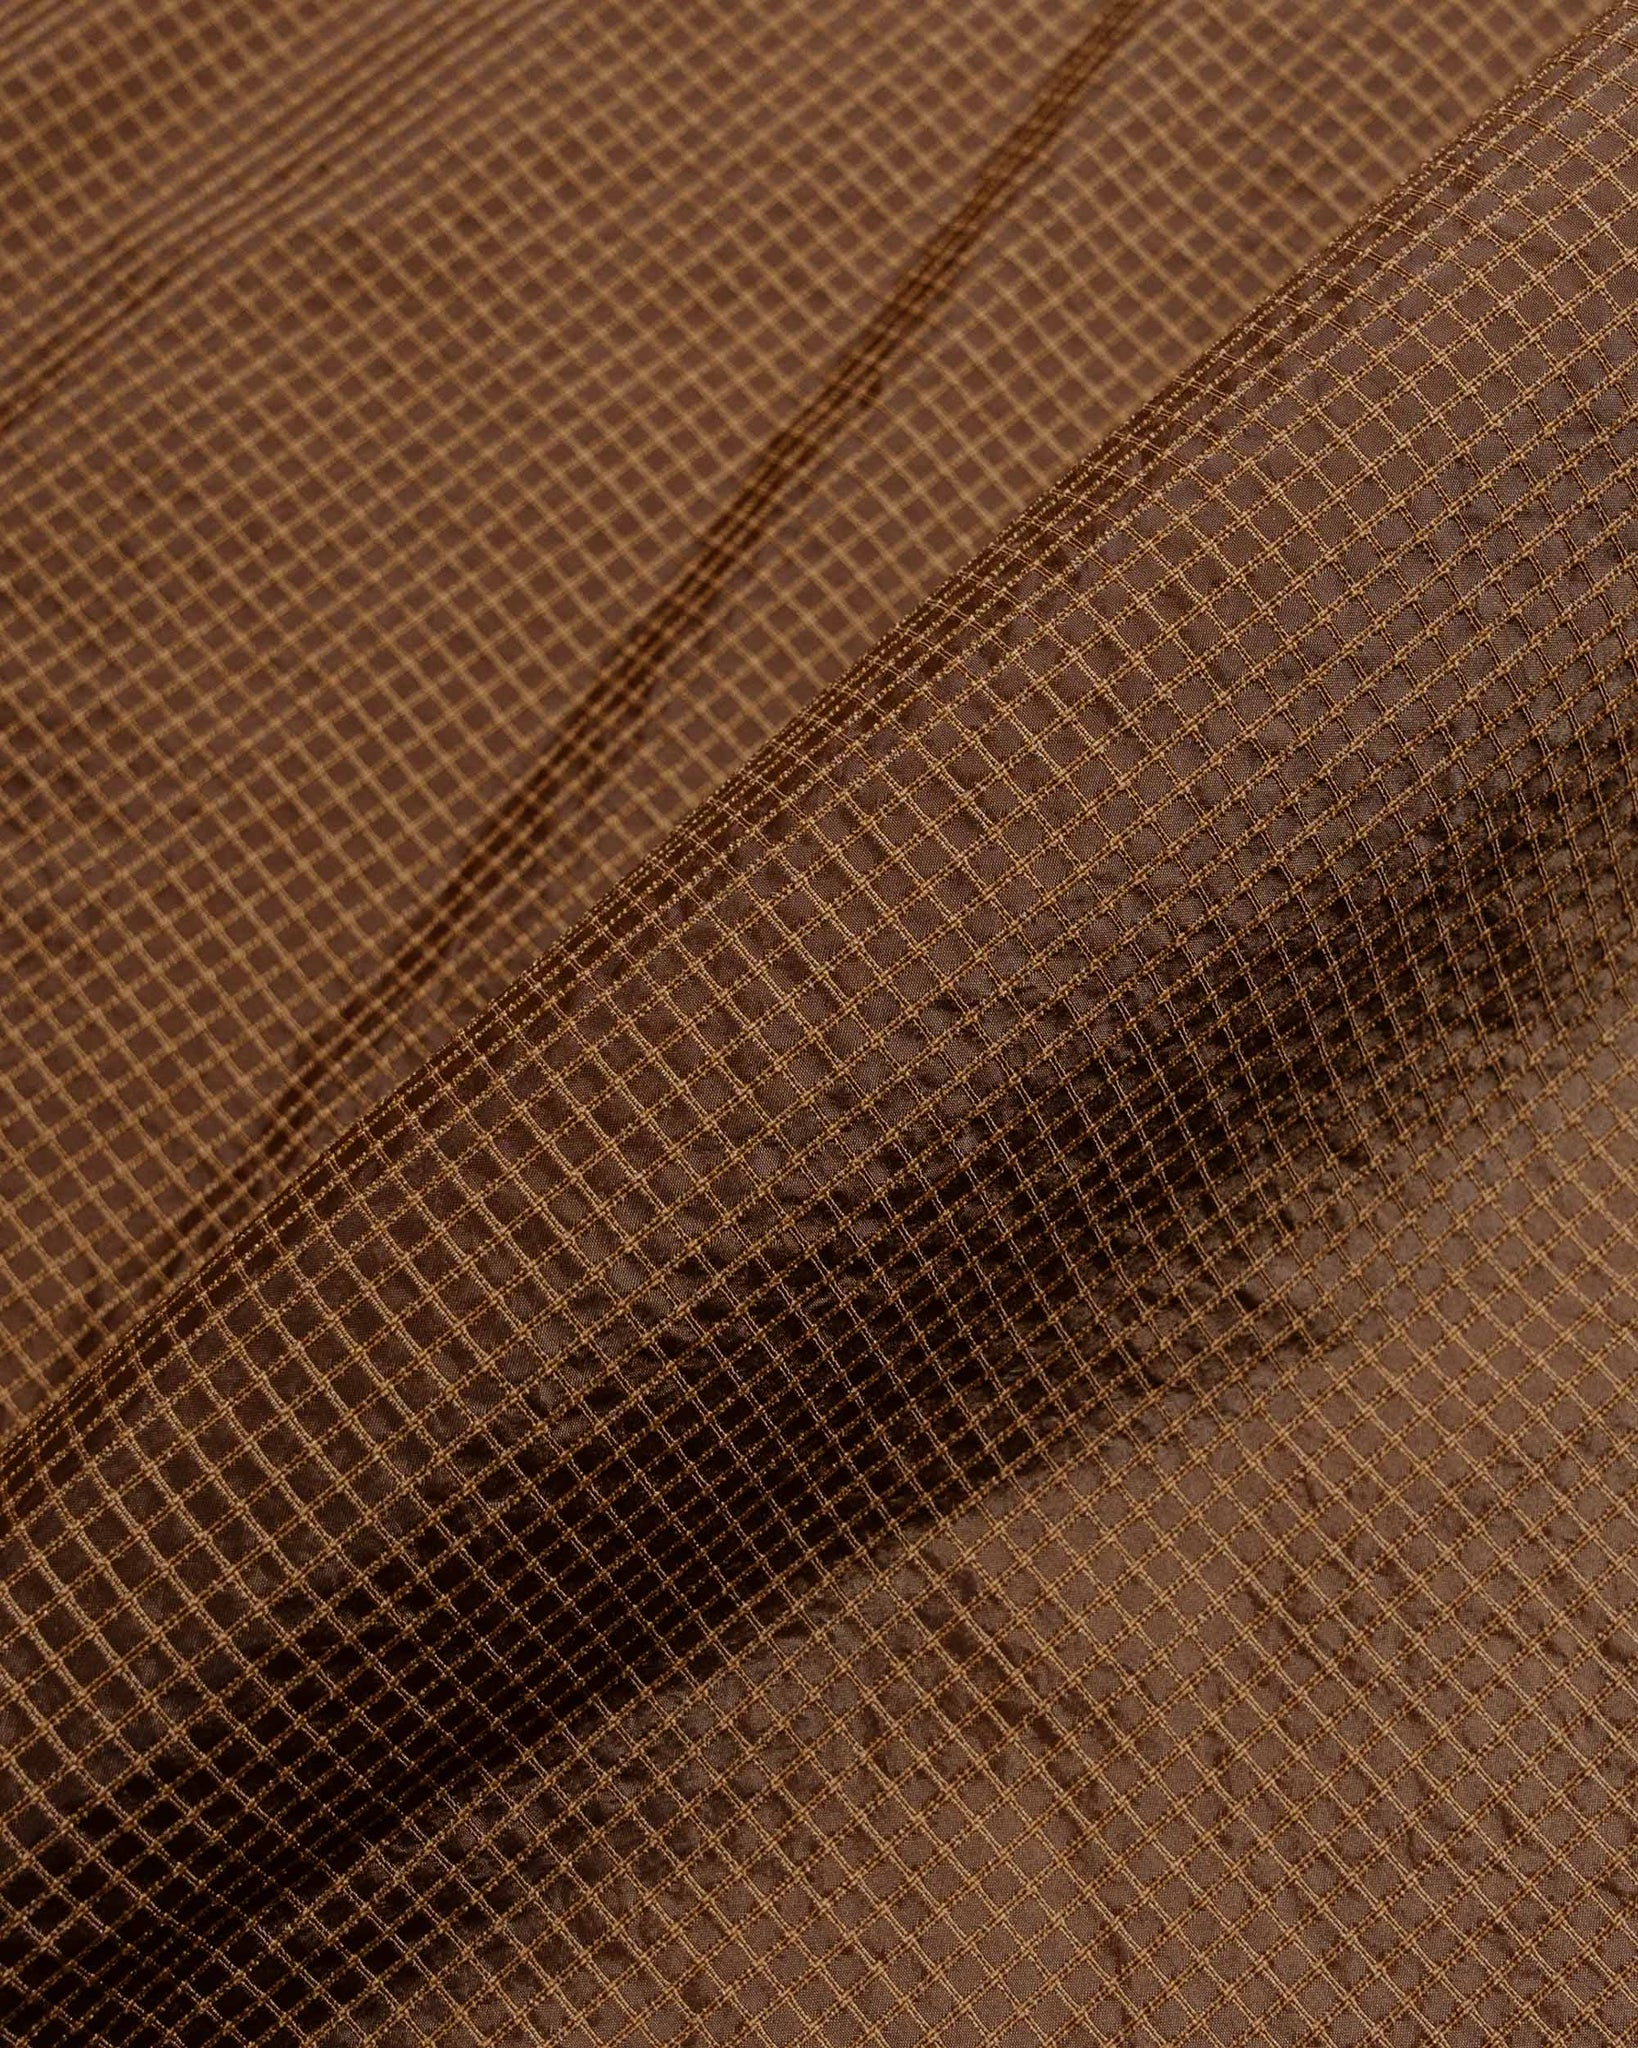 Our Legacy Mount Cargo Golden Brown Tactile Ripstop fabric